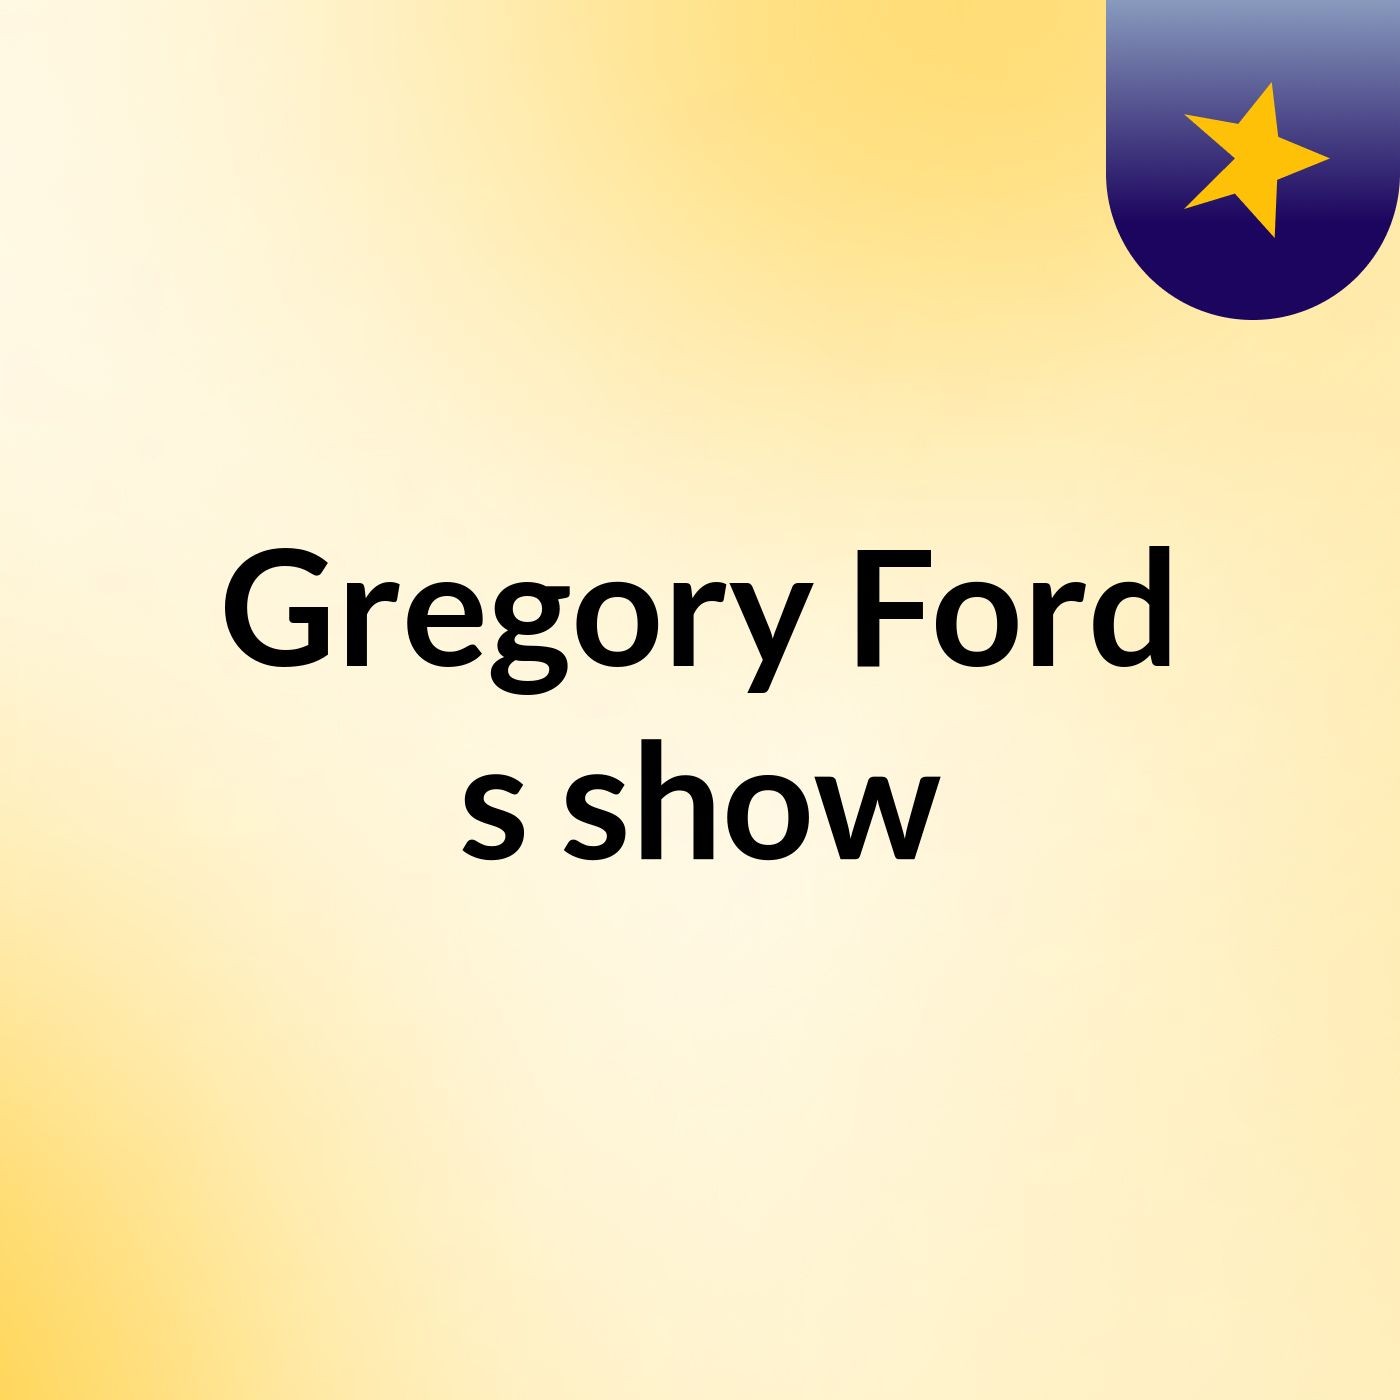 Episode 6 - Gregory Ford's show